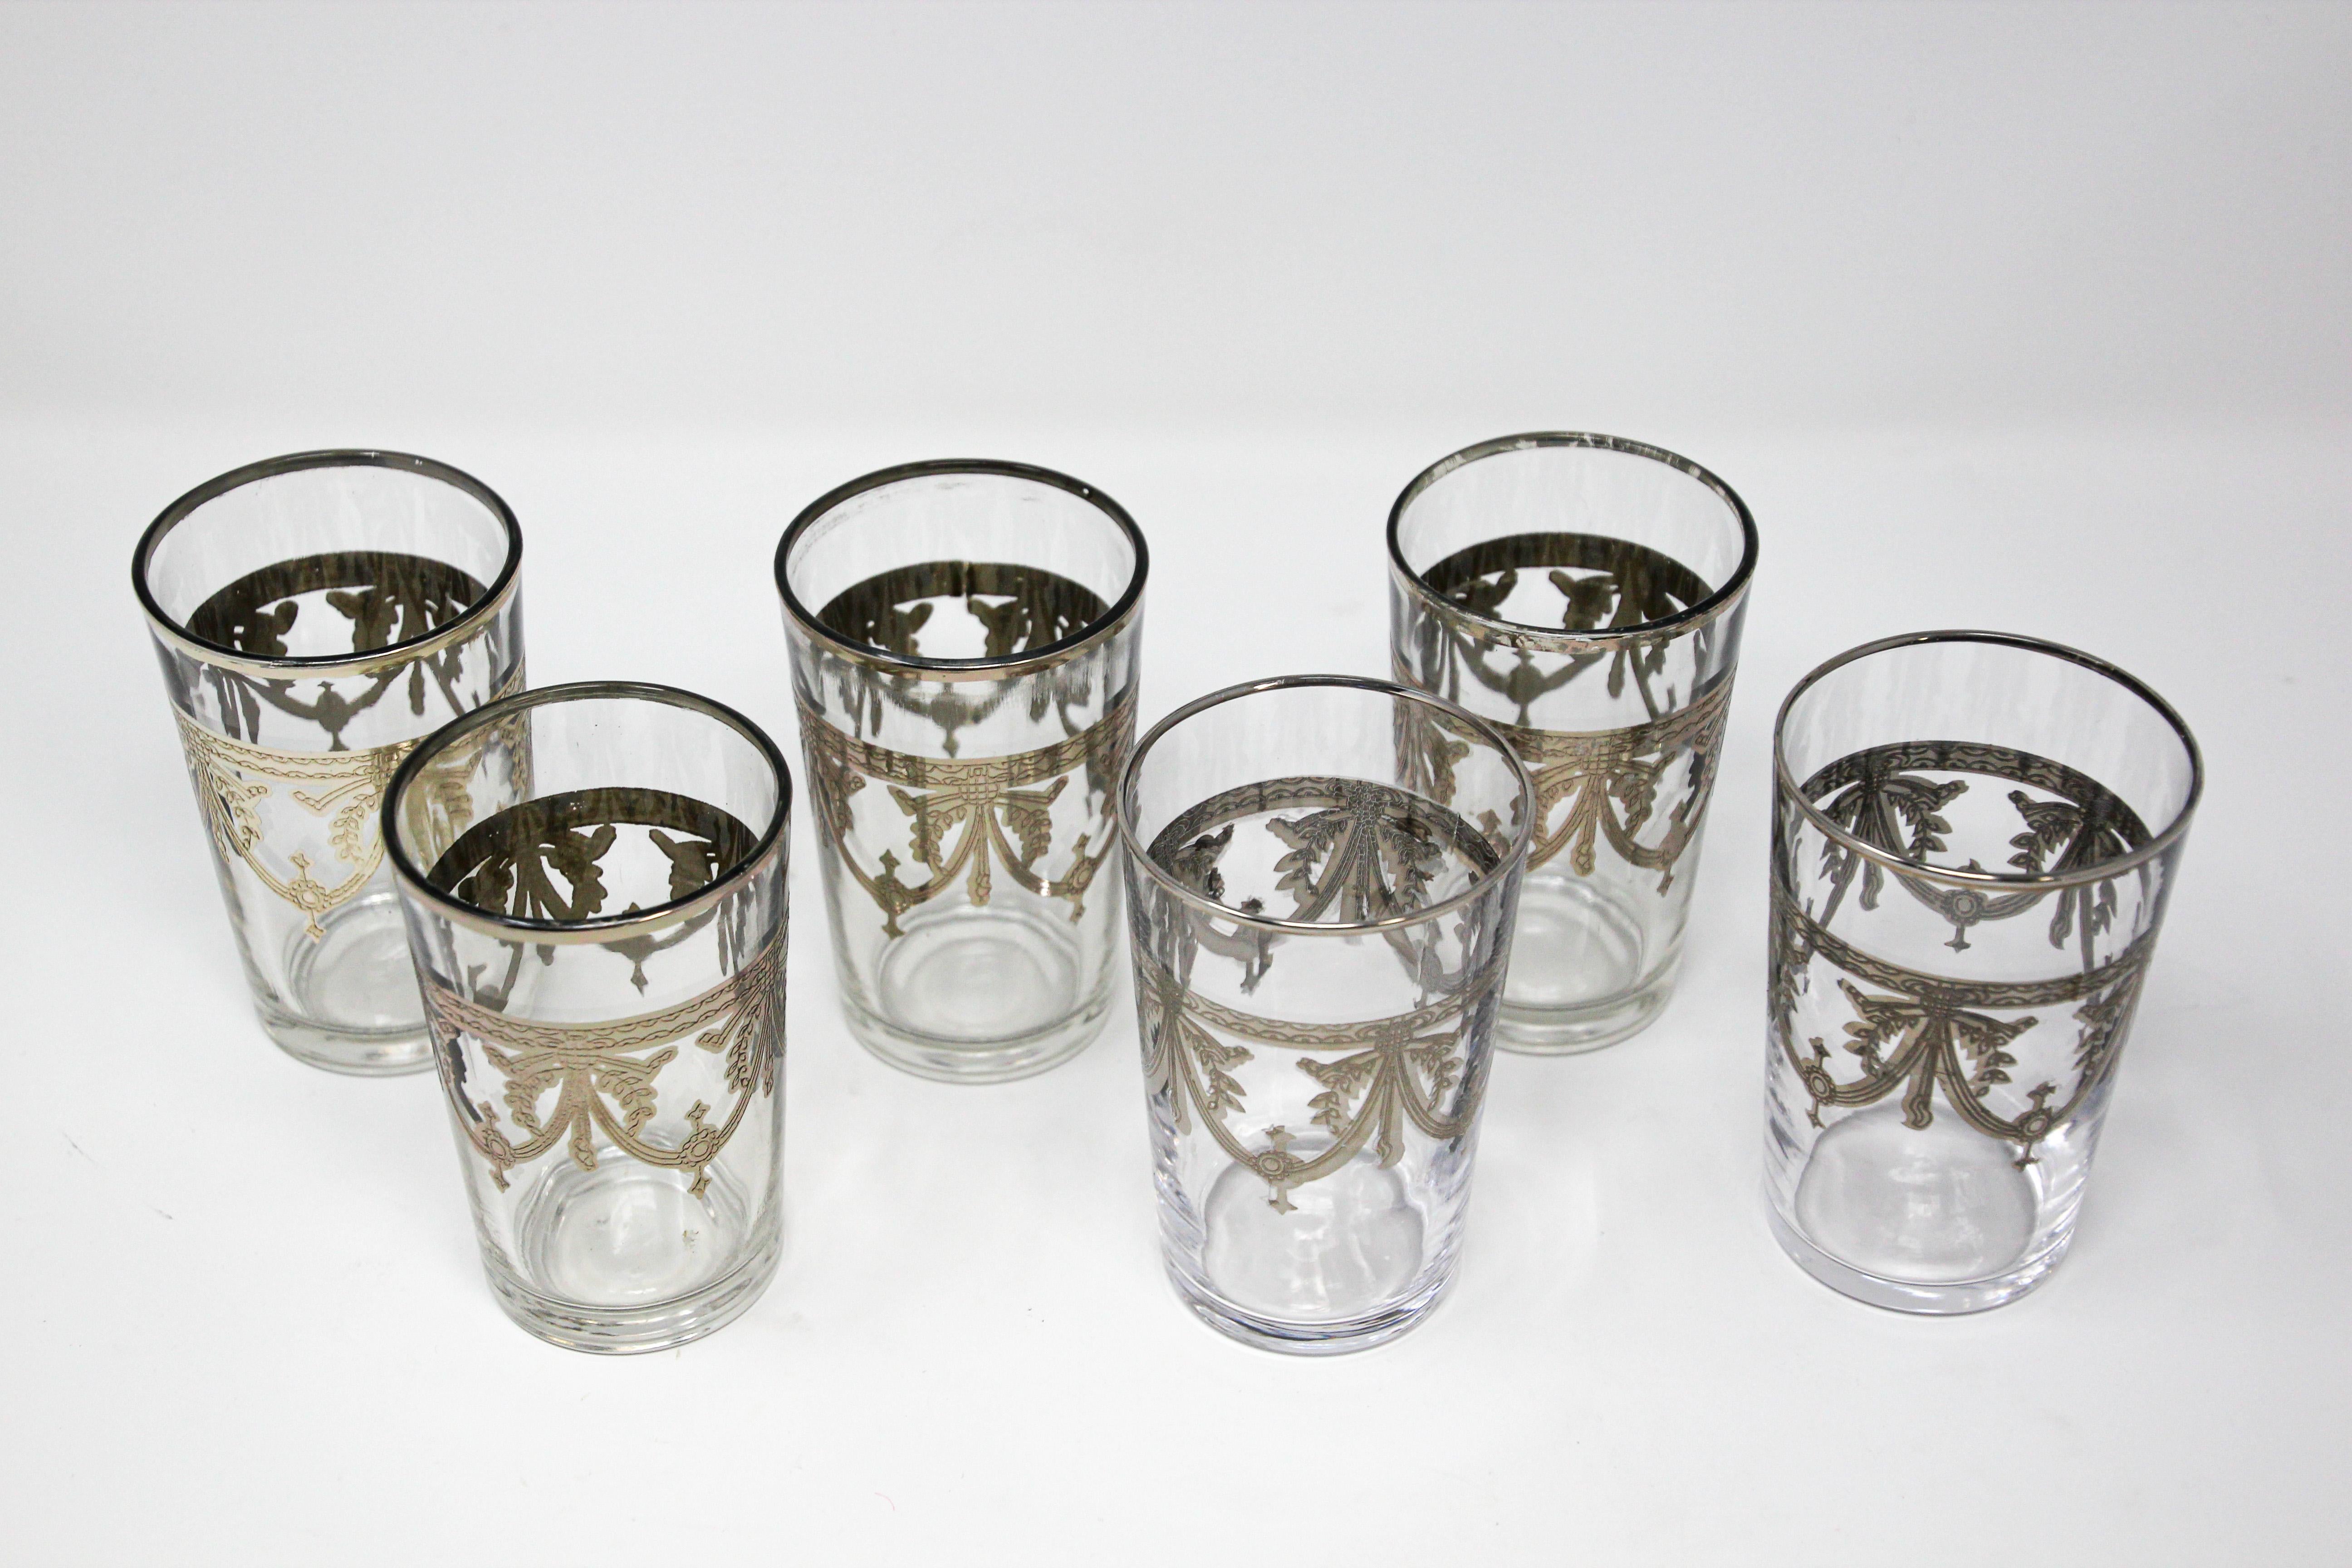 Moroccan Glasses Set of Six Clear with Silver Overlay Moorish Pattern In Good Condition For Sale In North Hollywood, CA